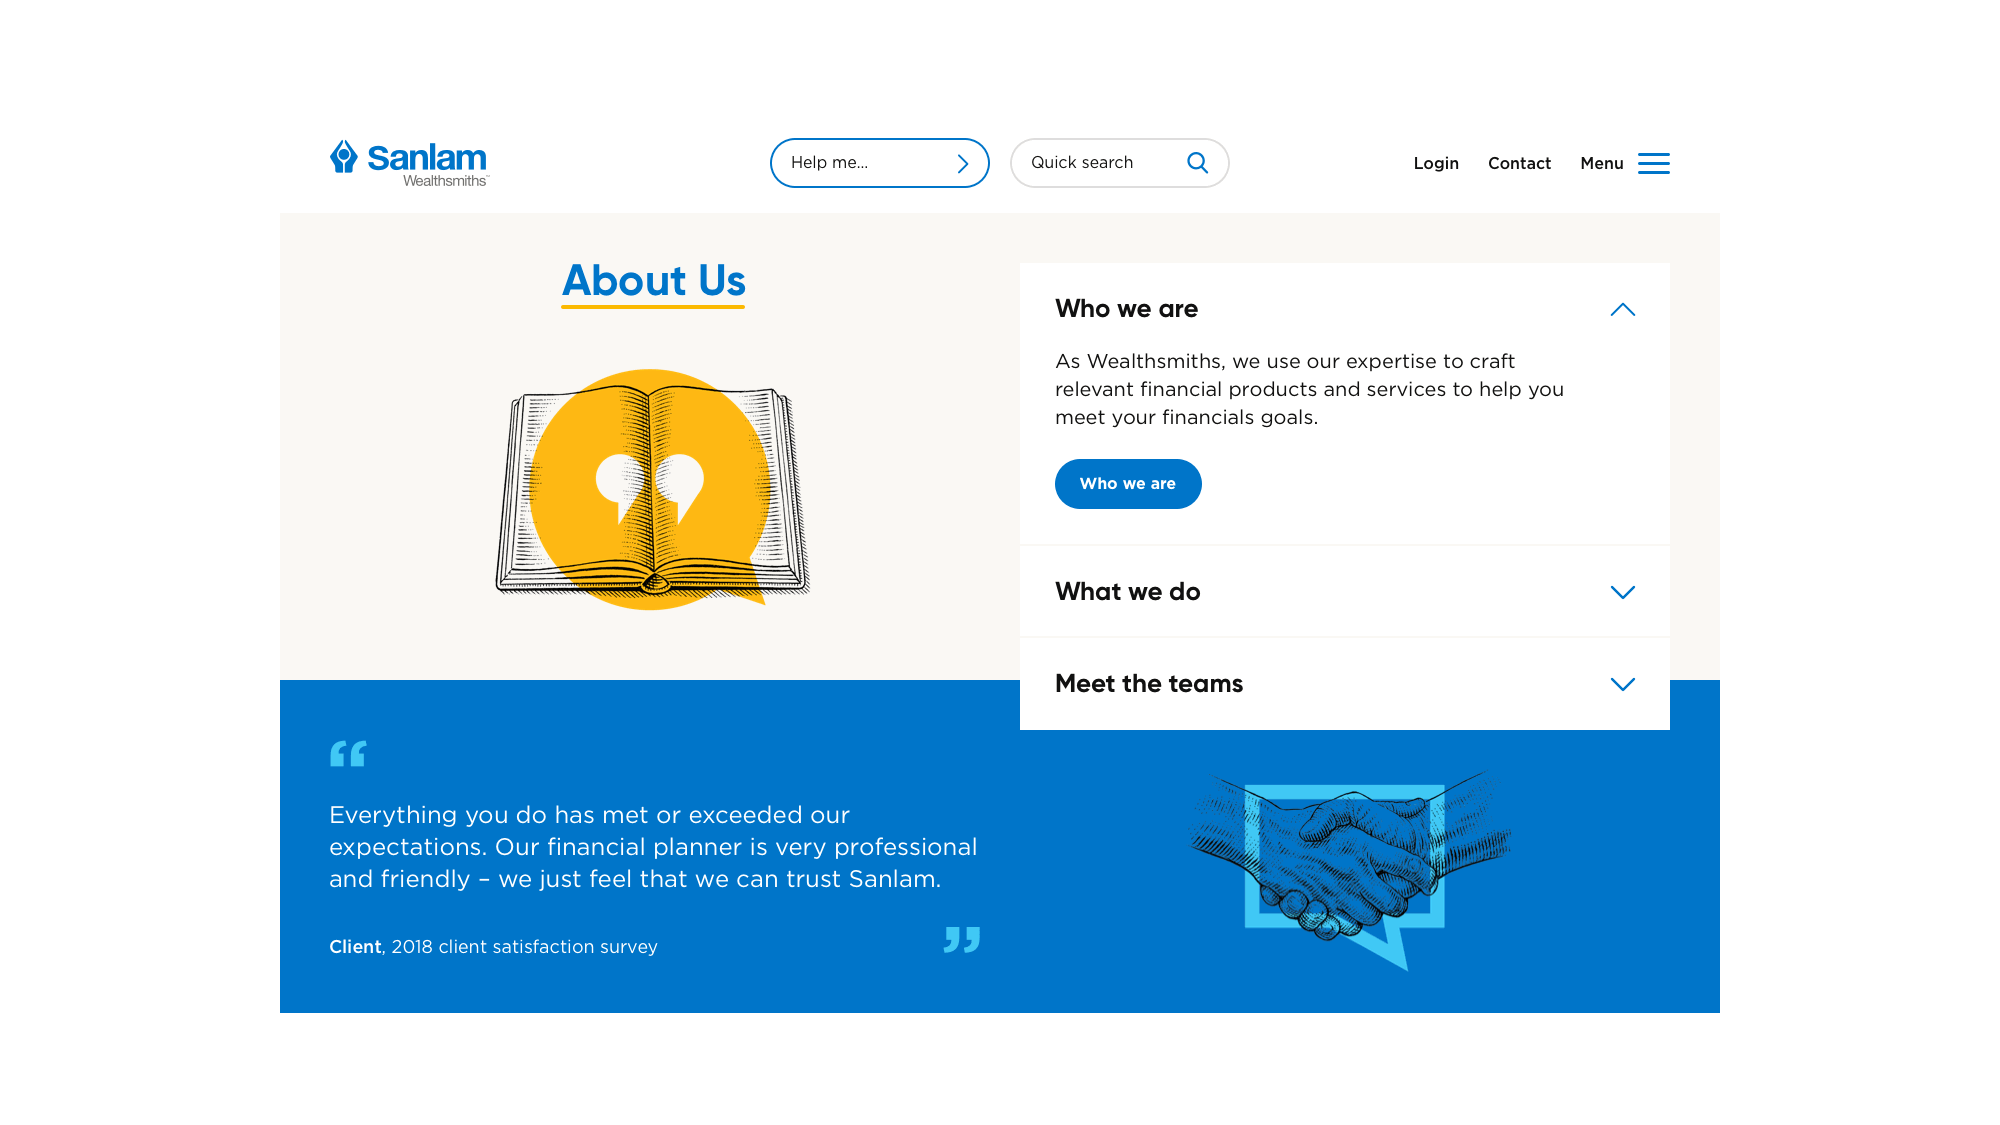 ‘About Us’ section on Sanlam's homepage